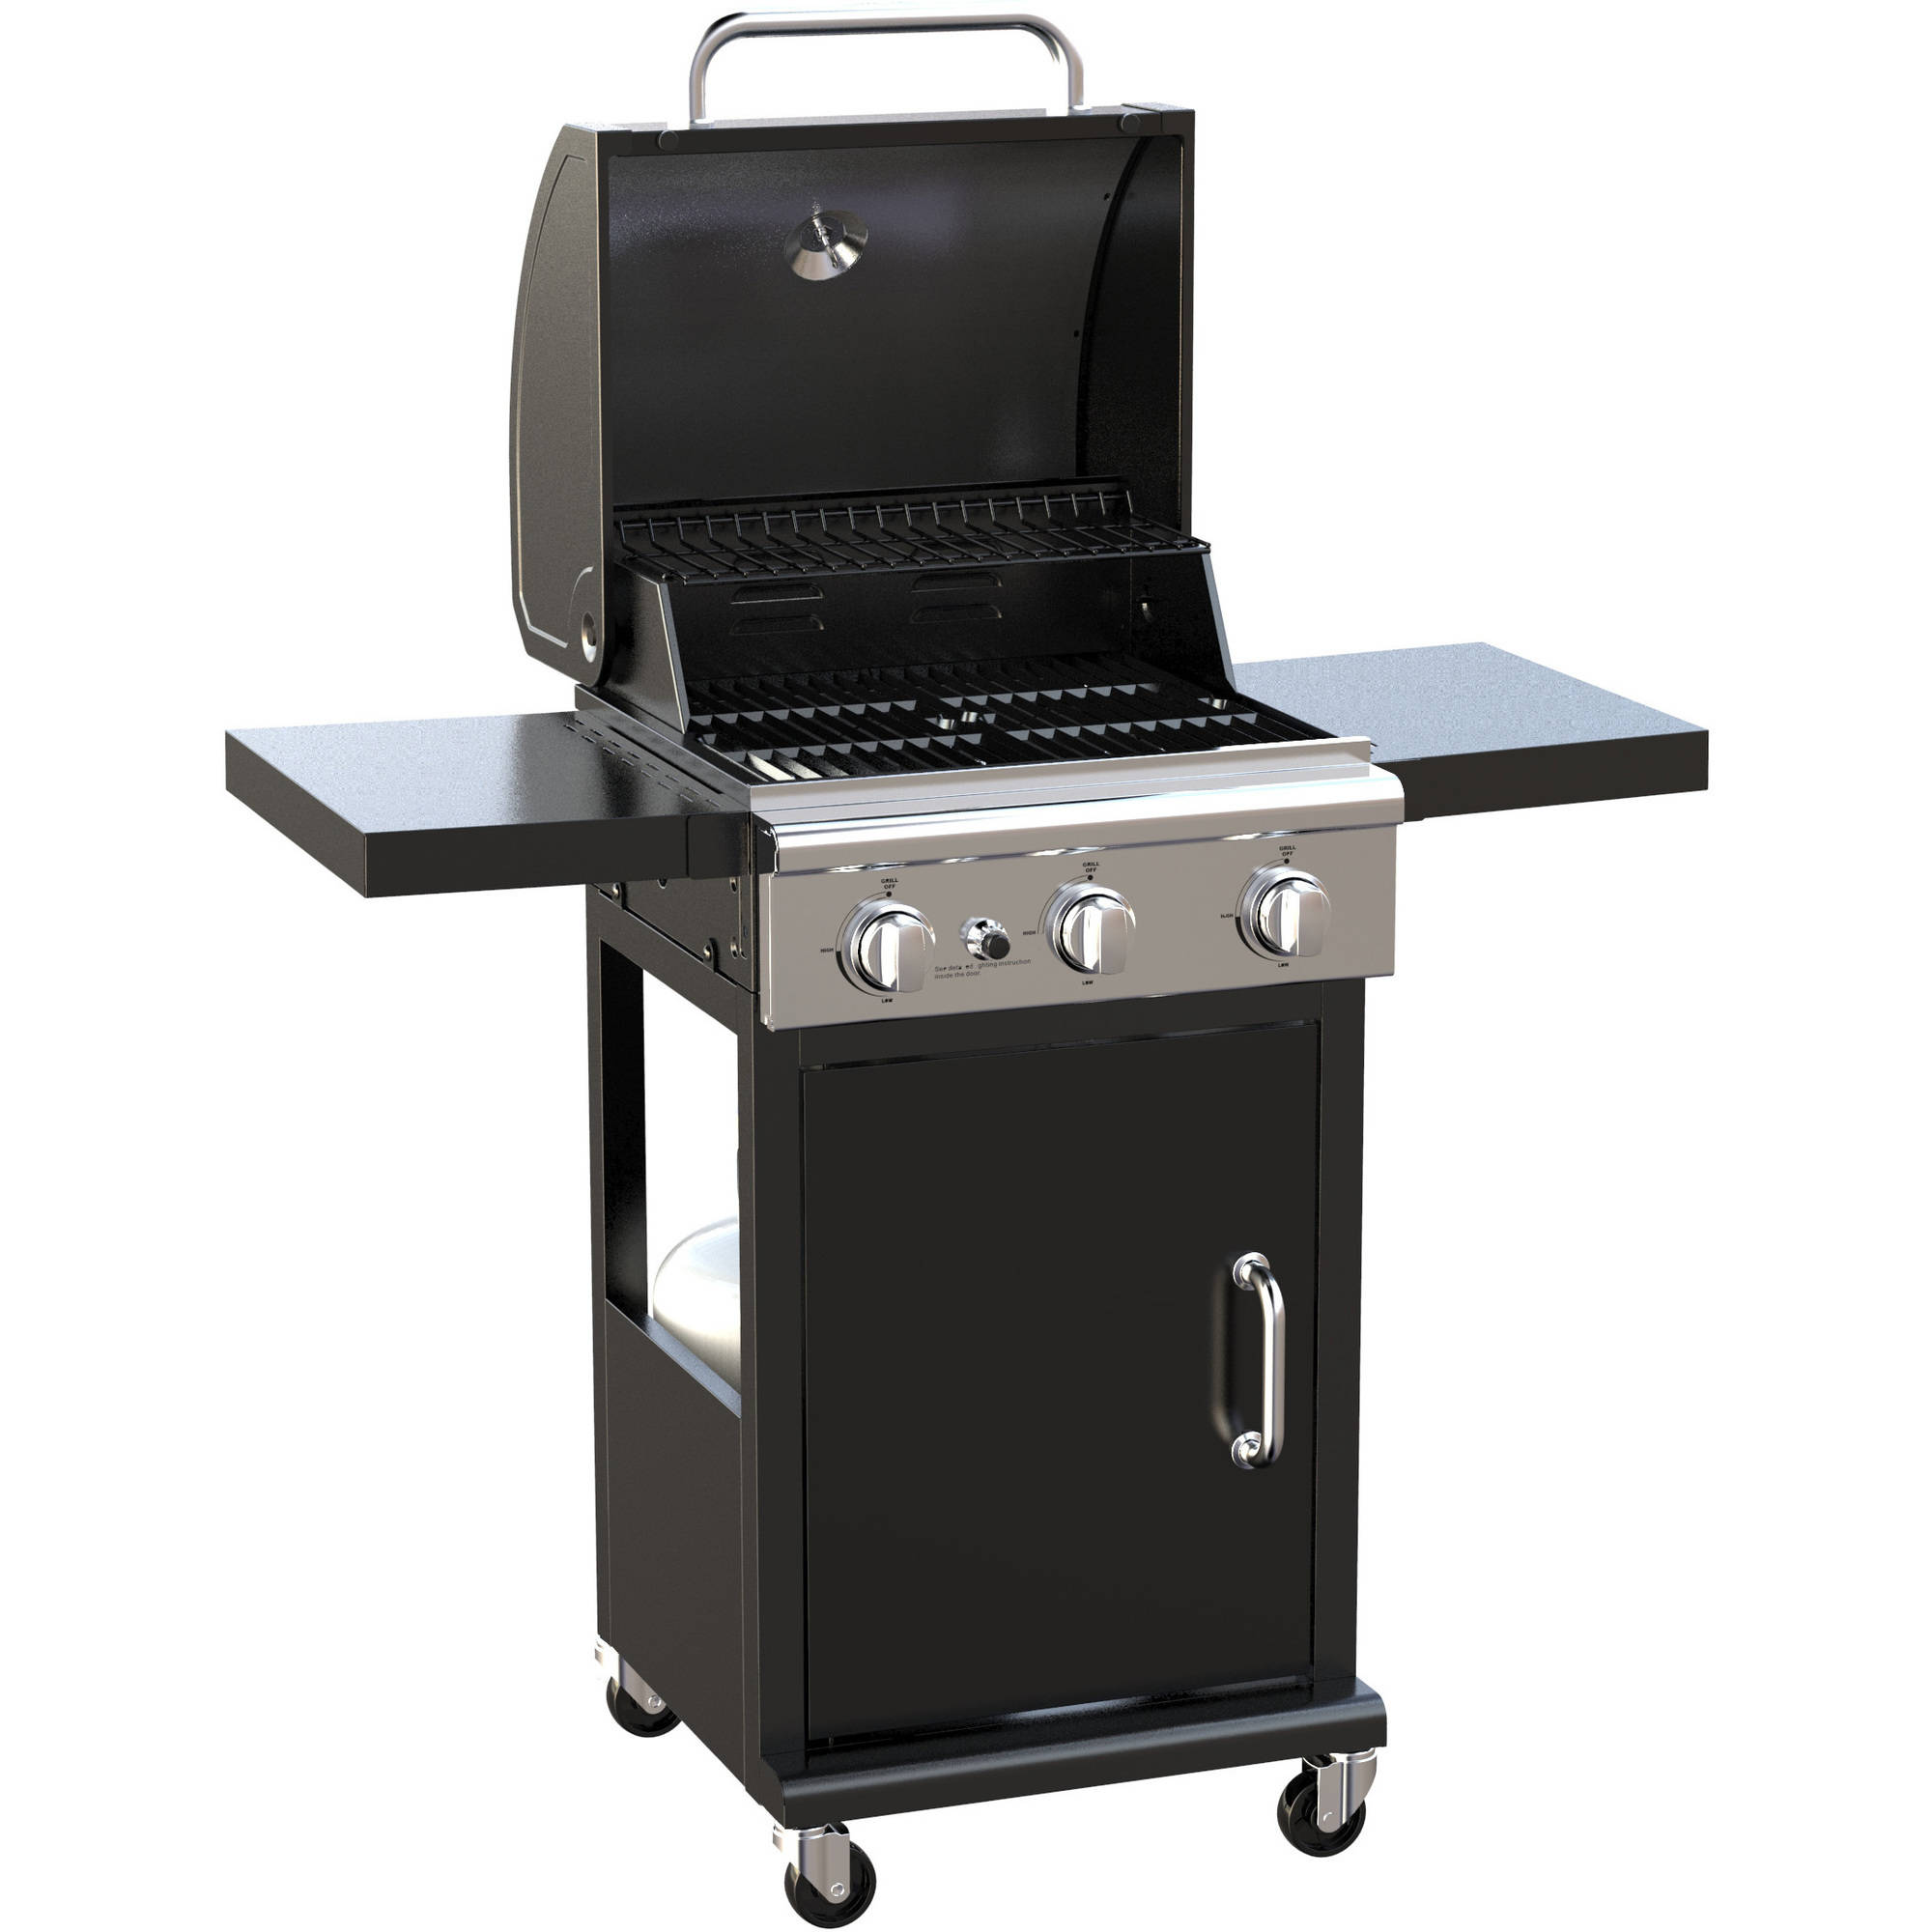 Better Homes and Gardens 3-Burner Gas Grill - image 2 of 7